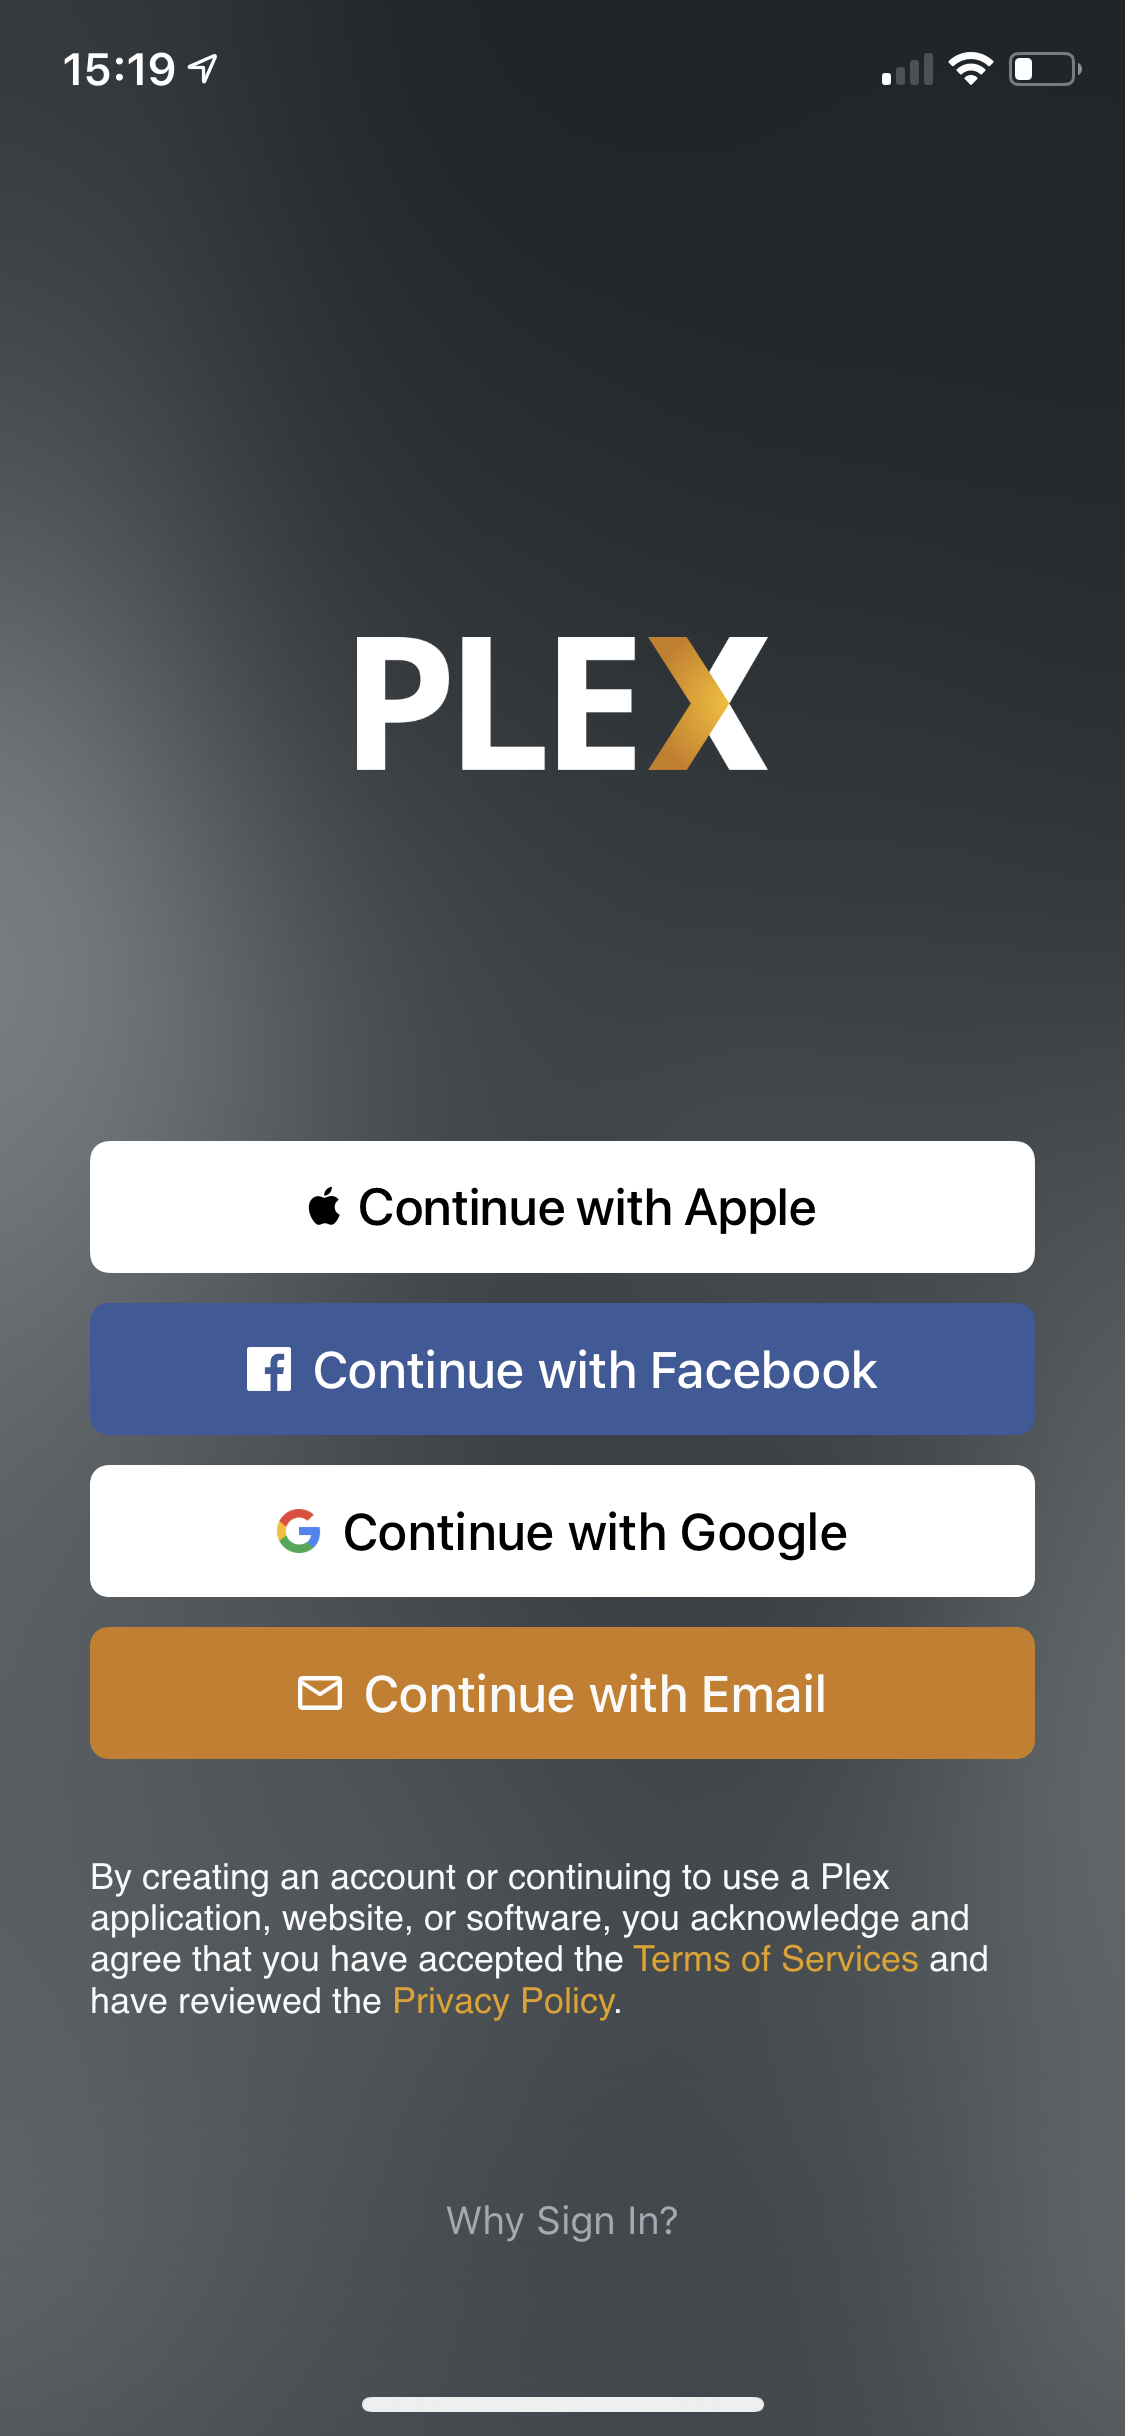 You can sign in to our iOS app using Google, Facebook, Apple, or your email address